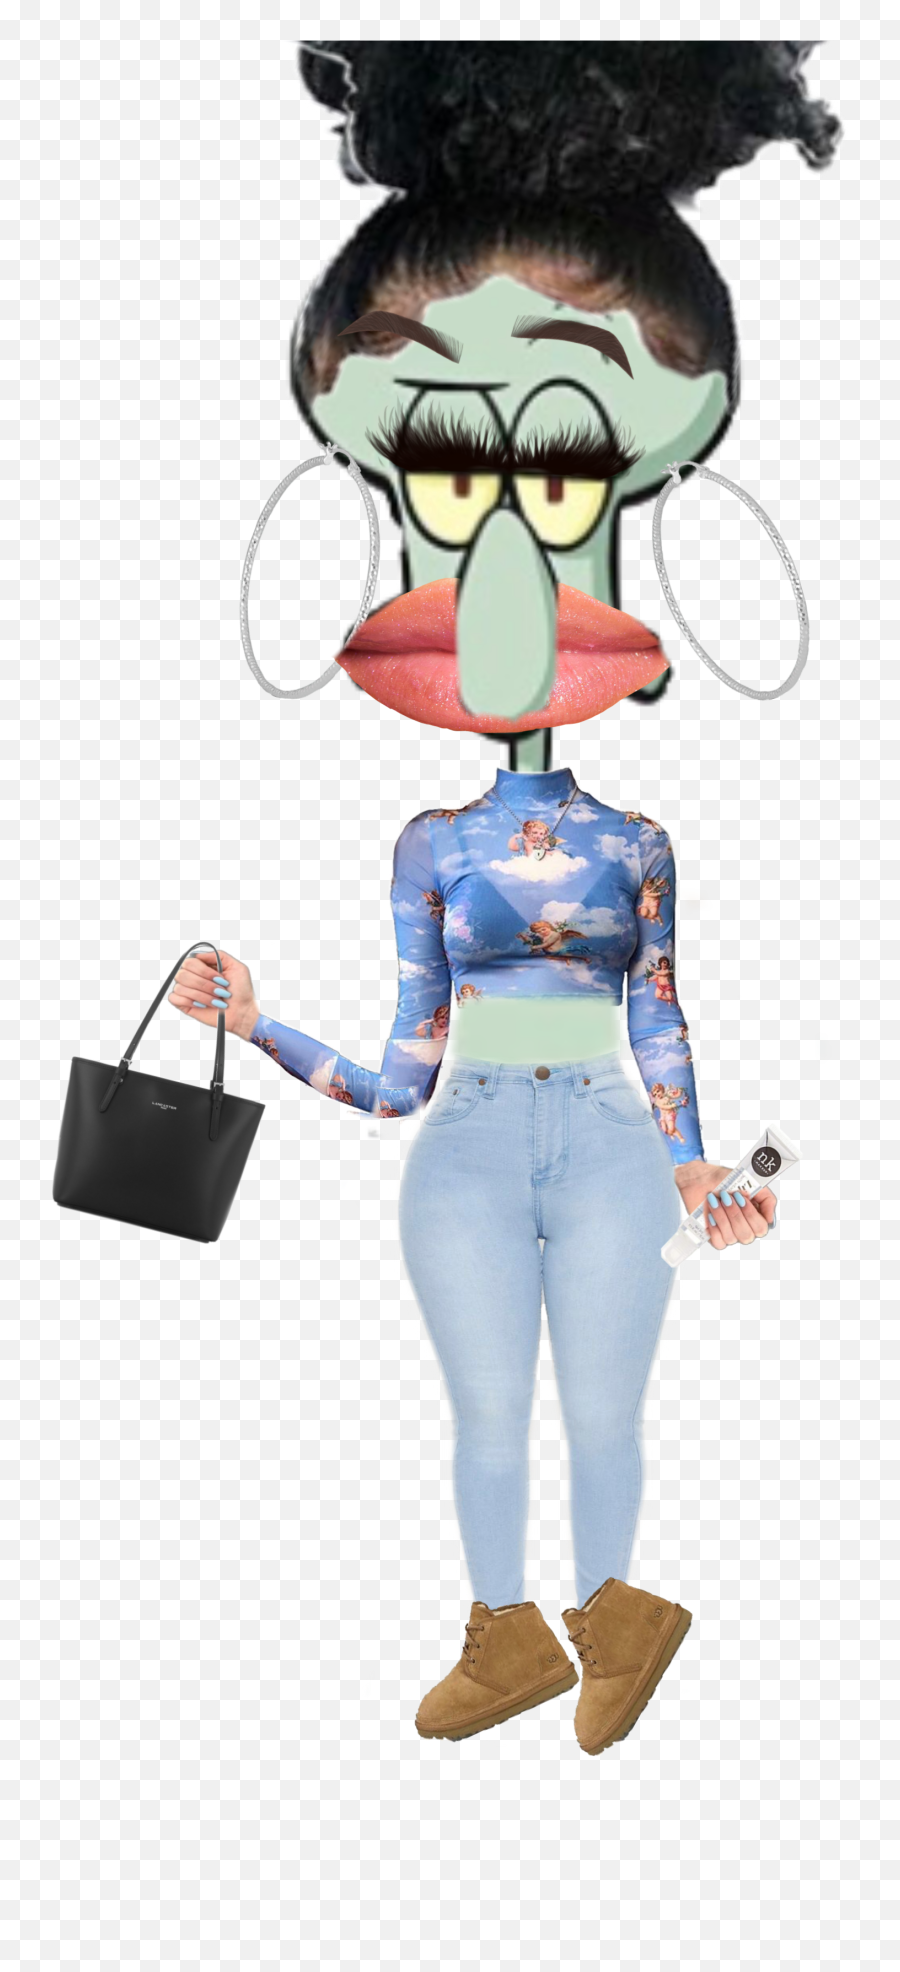 The Most Edited Squidward Picsart Png Icon